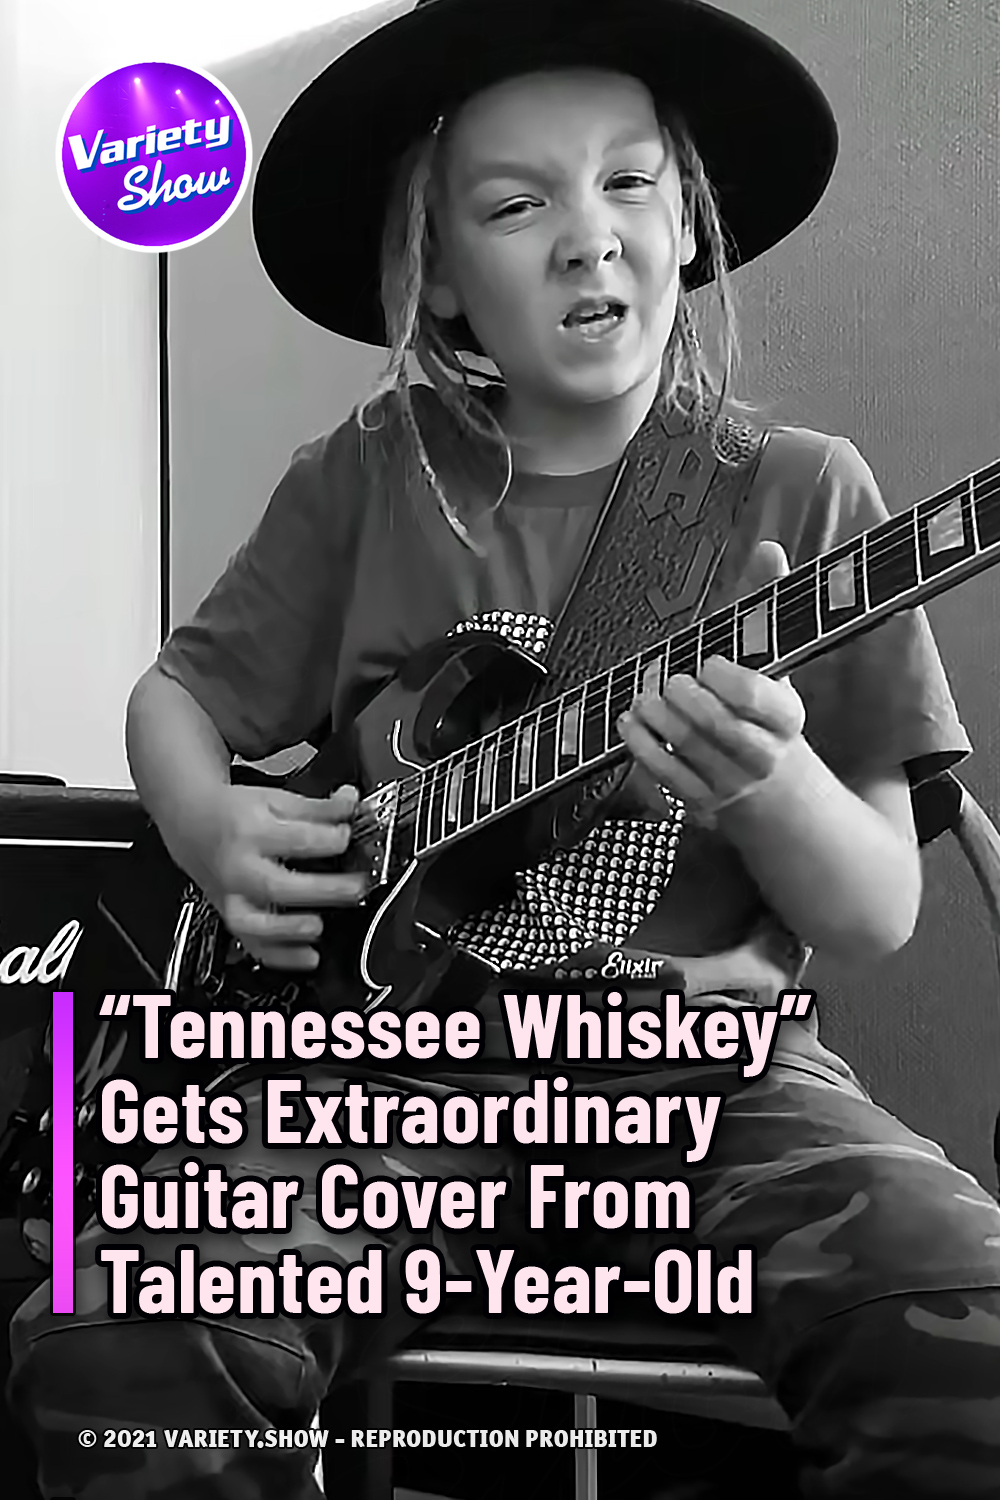 “Tennessee Whiskey” Gets Extraordinary Guitar Cover From Talented 9-Year-Old